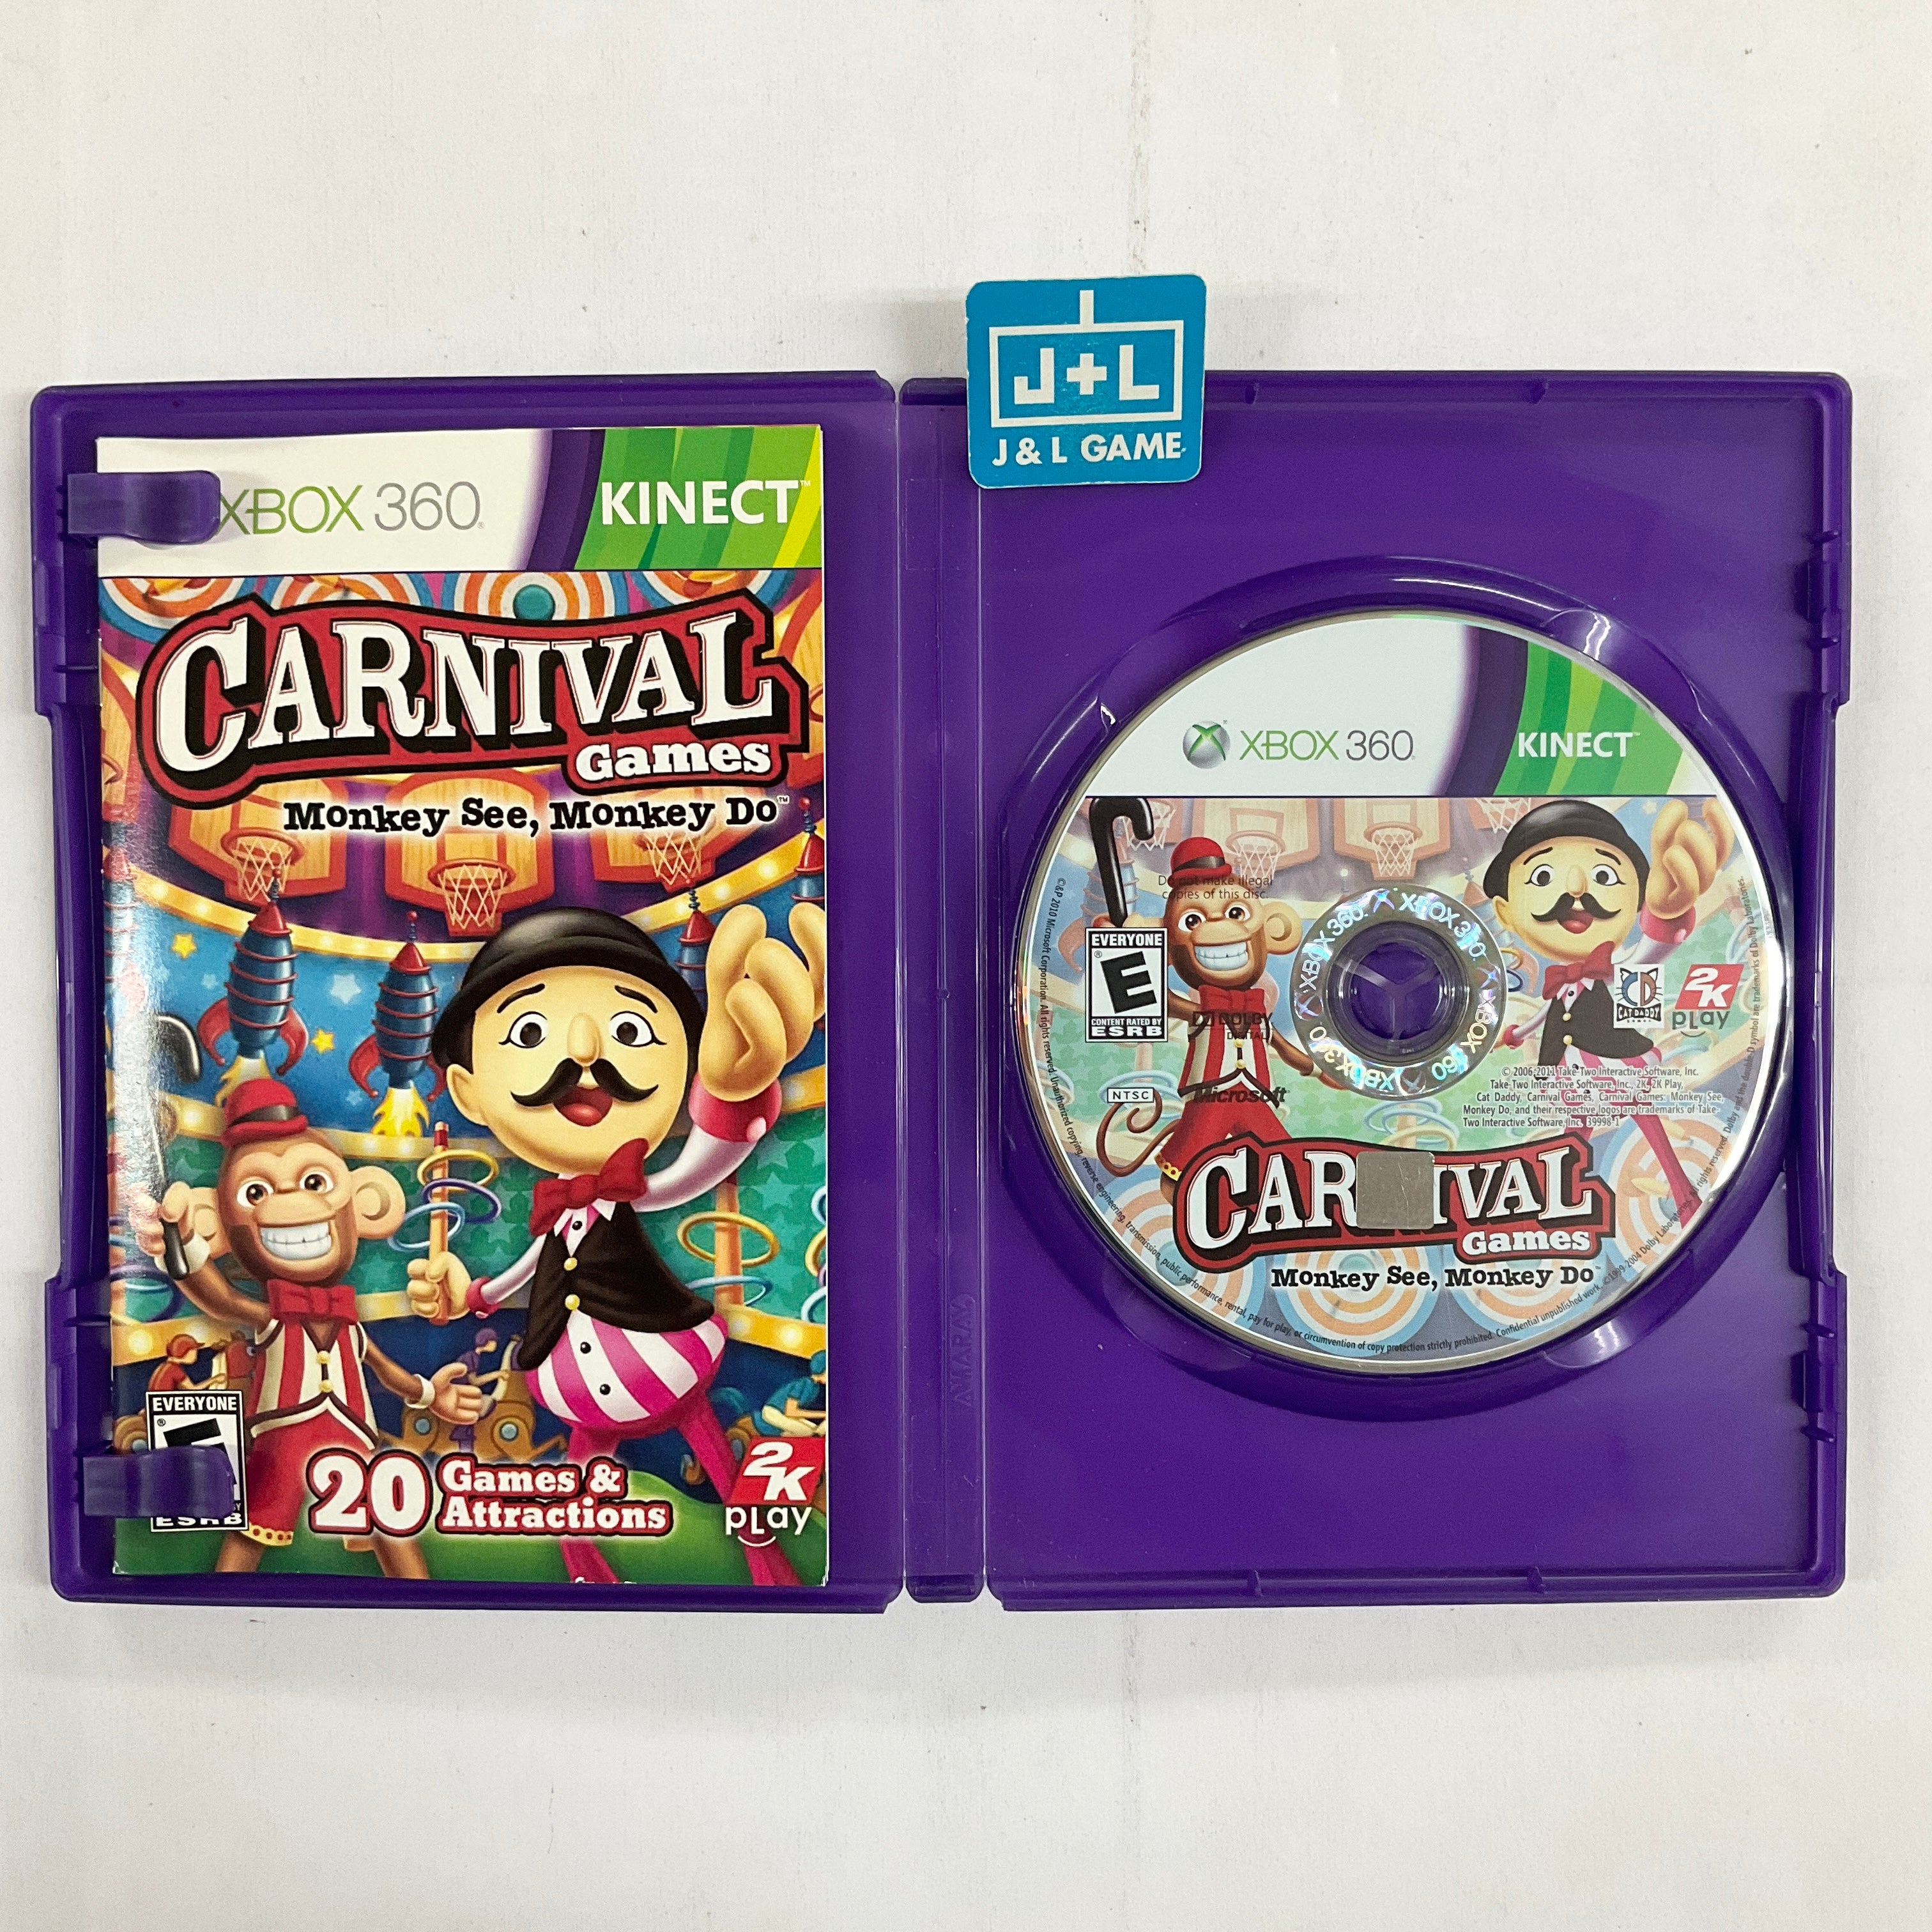 Carnival Games: Monkey See, Monkey Do! (Kinect Required) - Xbox 360 [Pre-Owned] Video Games Take-Two Interactive   